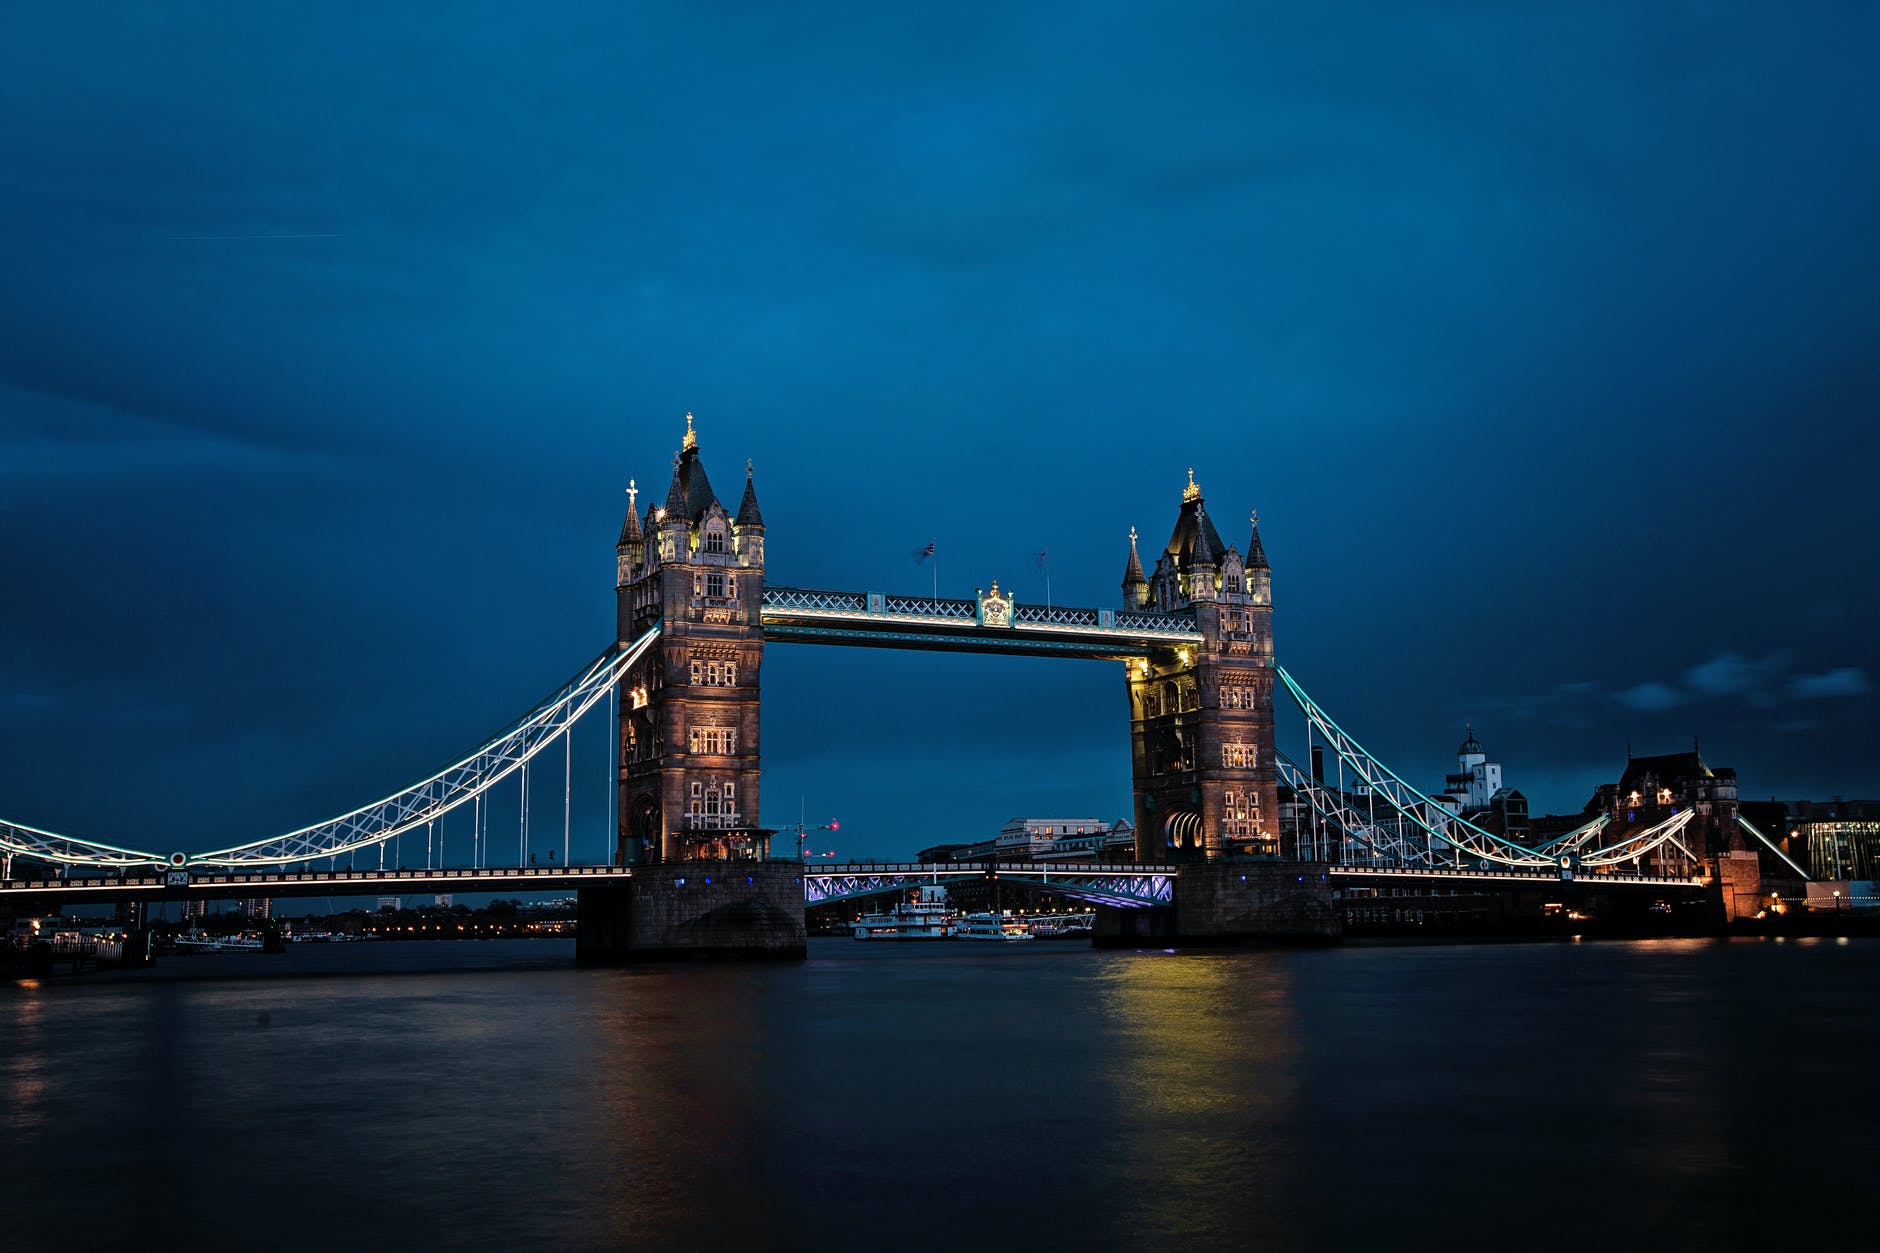 The London tower bridge in the heart of the supercar capital of the world.